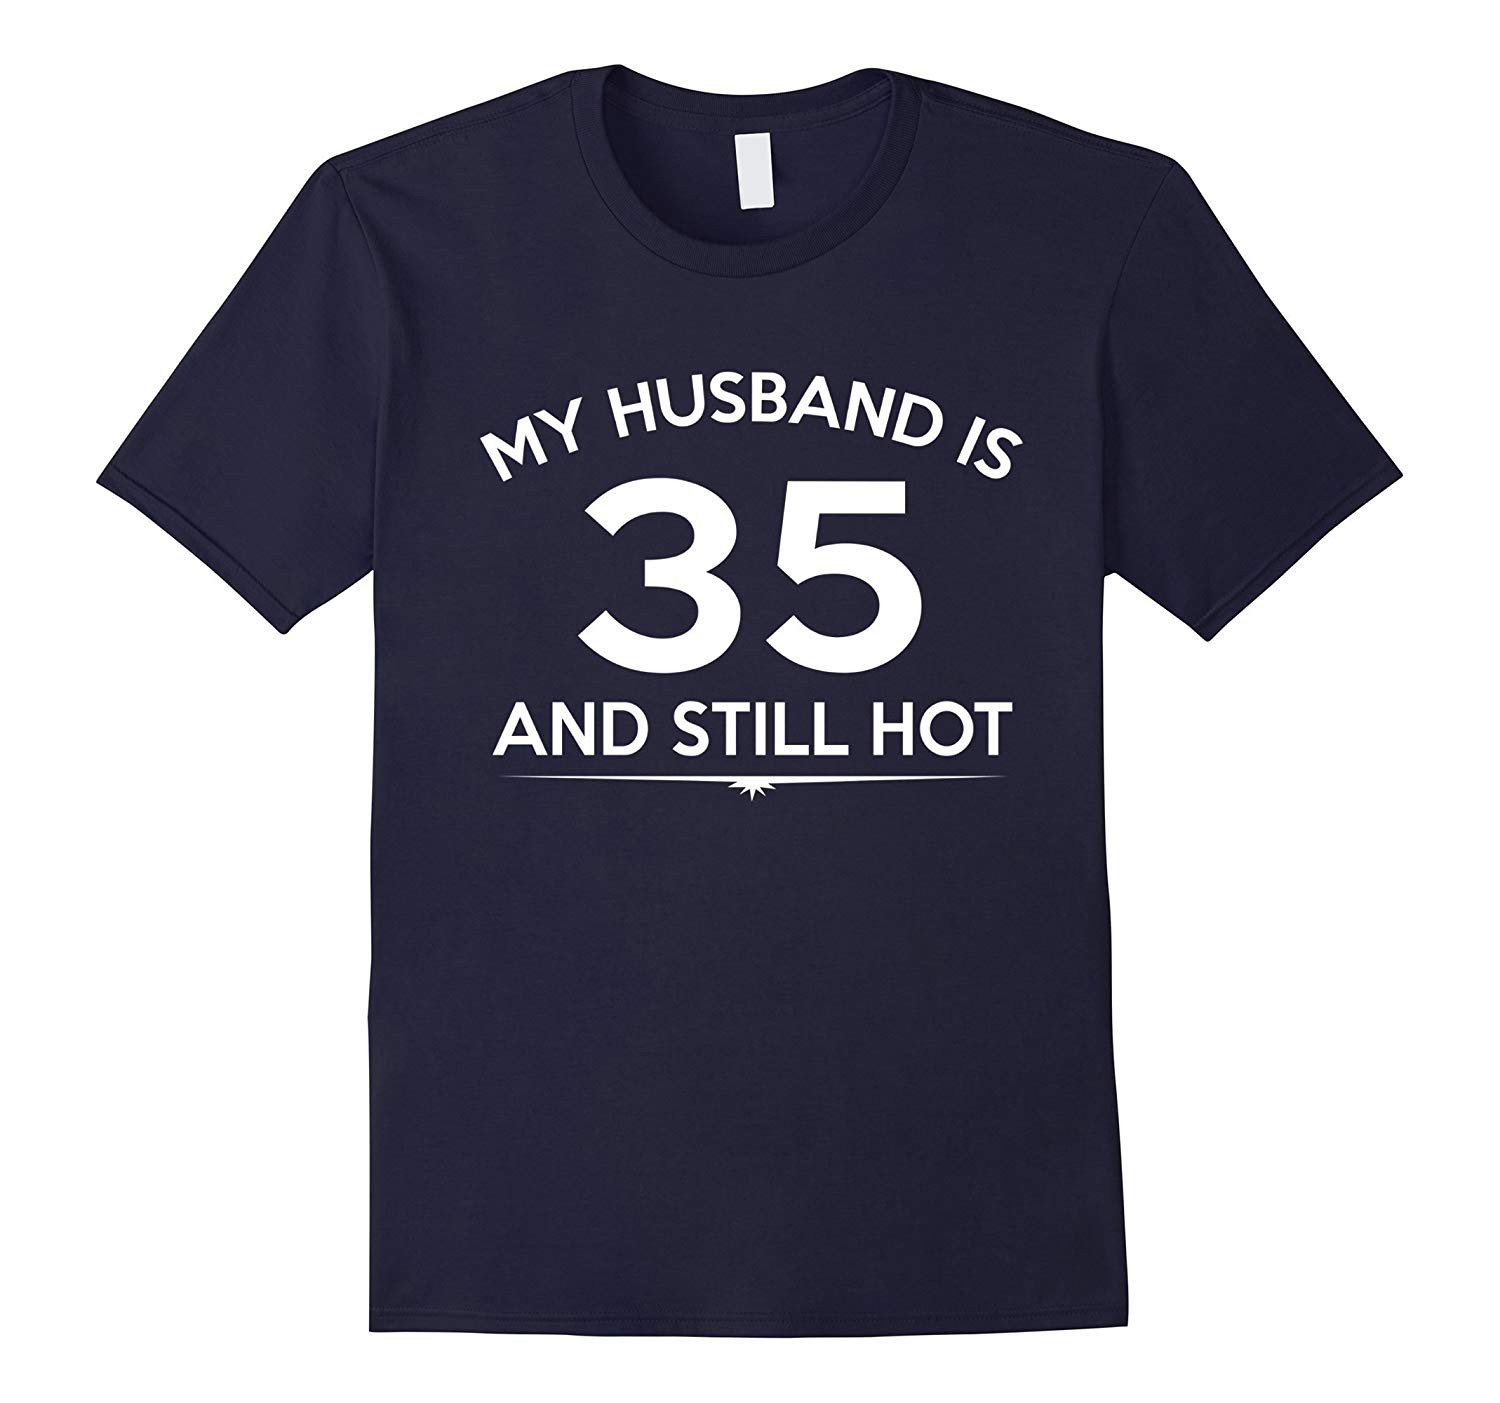 35Th Birthday Gift Ideas For Him
 My Husband is 35 and hot 35th Birthday Gift Ideas for him